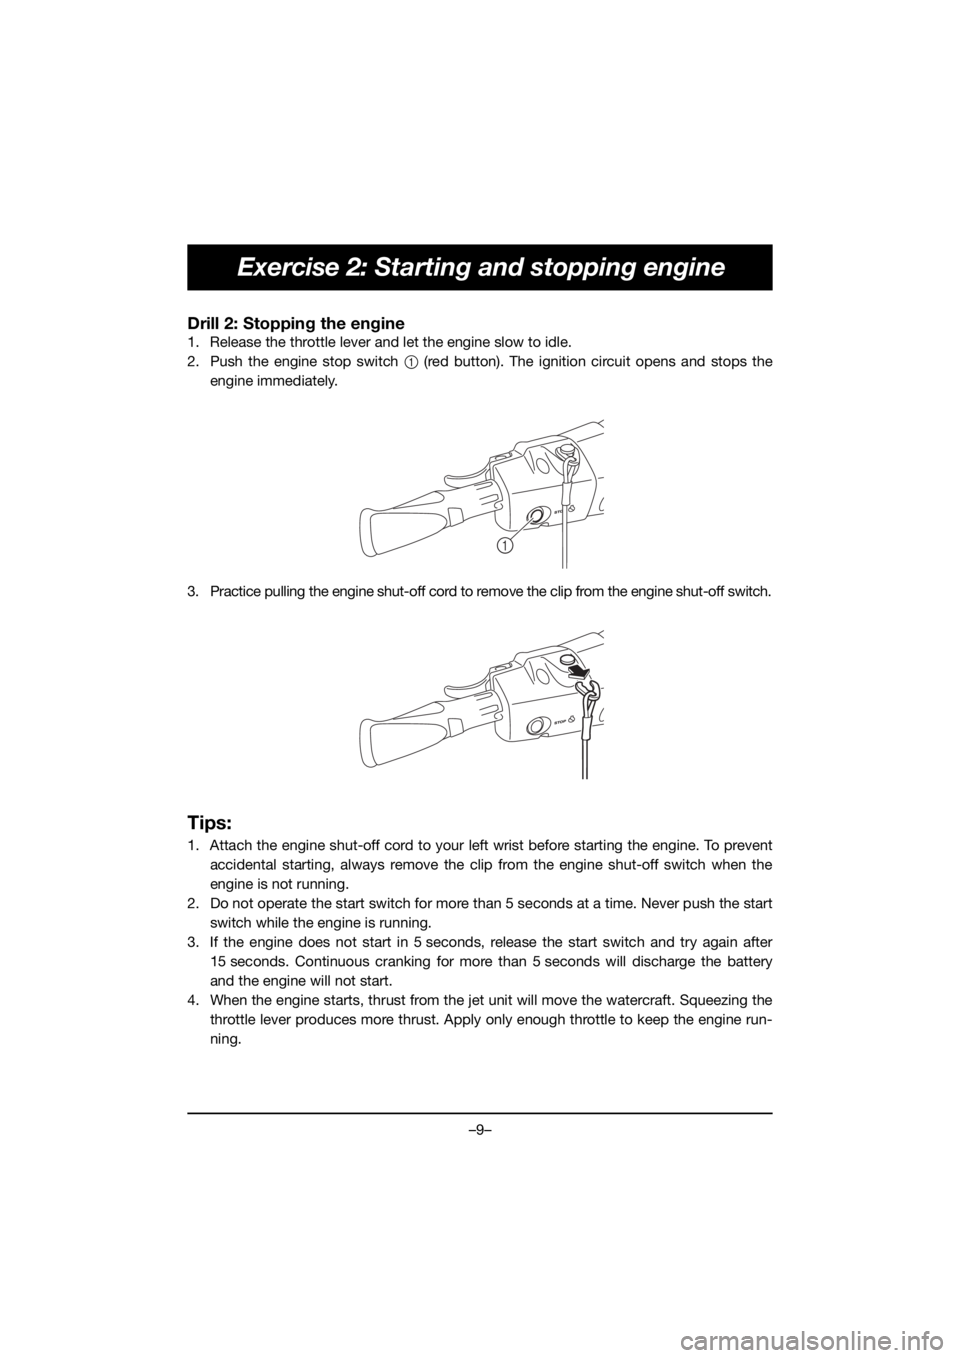 YAMAHA EXR 2020  Notices Demploi (in French) –9–
Exercise 2: Starting and stopping engine
Drill 2: Stopping the engine
1. Release the throttle lever and let the engine slow to idle.
2. Push the engine stop switch 1 (red button). The ignition